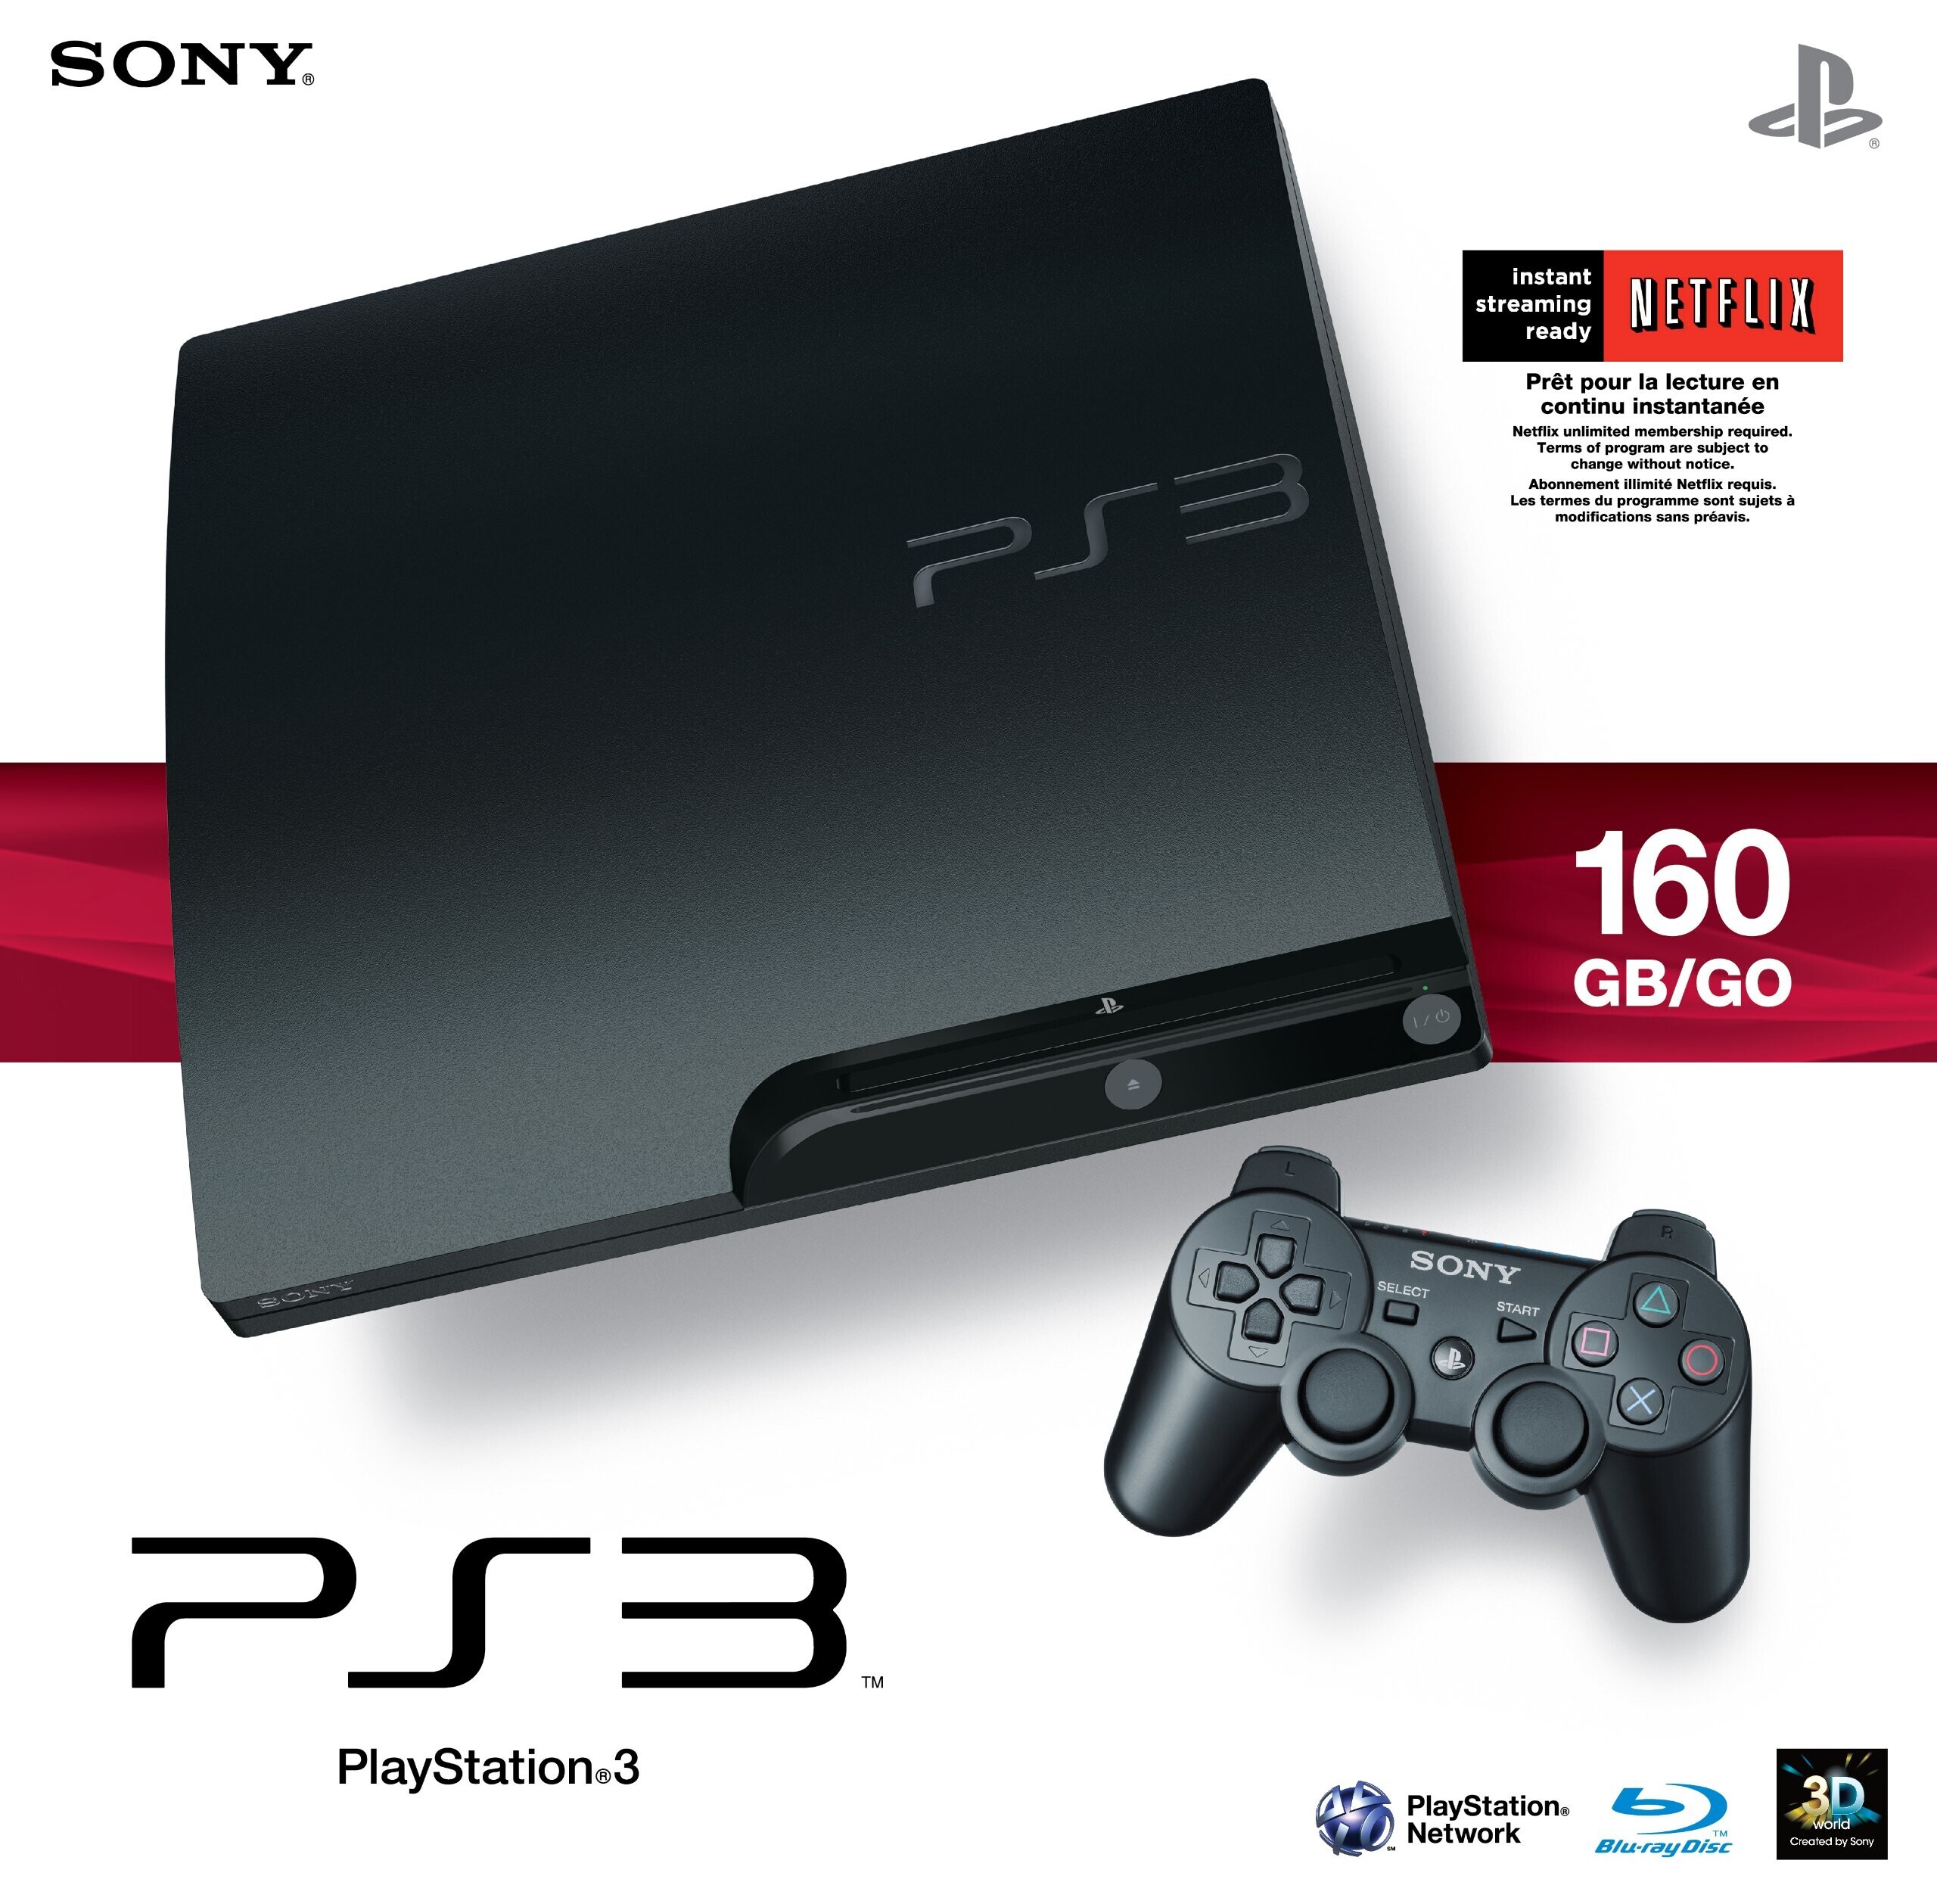 Sony PlayStation 3 Overview Consolevariations